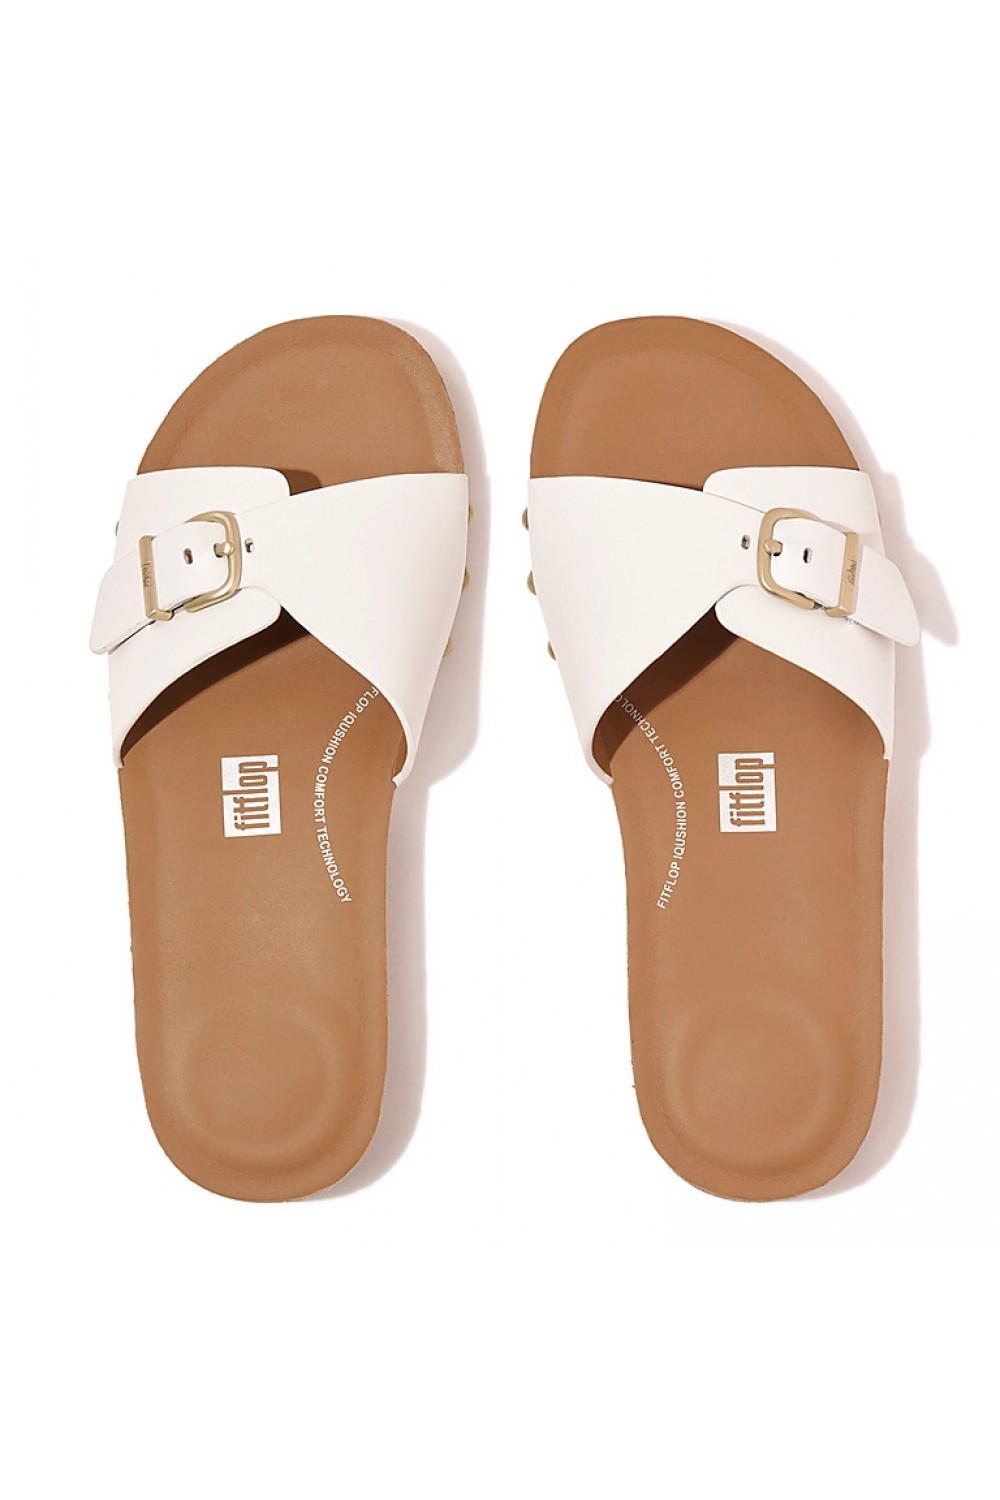 Fitflop IQUSHION Adjustable Buckle Leather Sliders Urban White